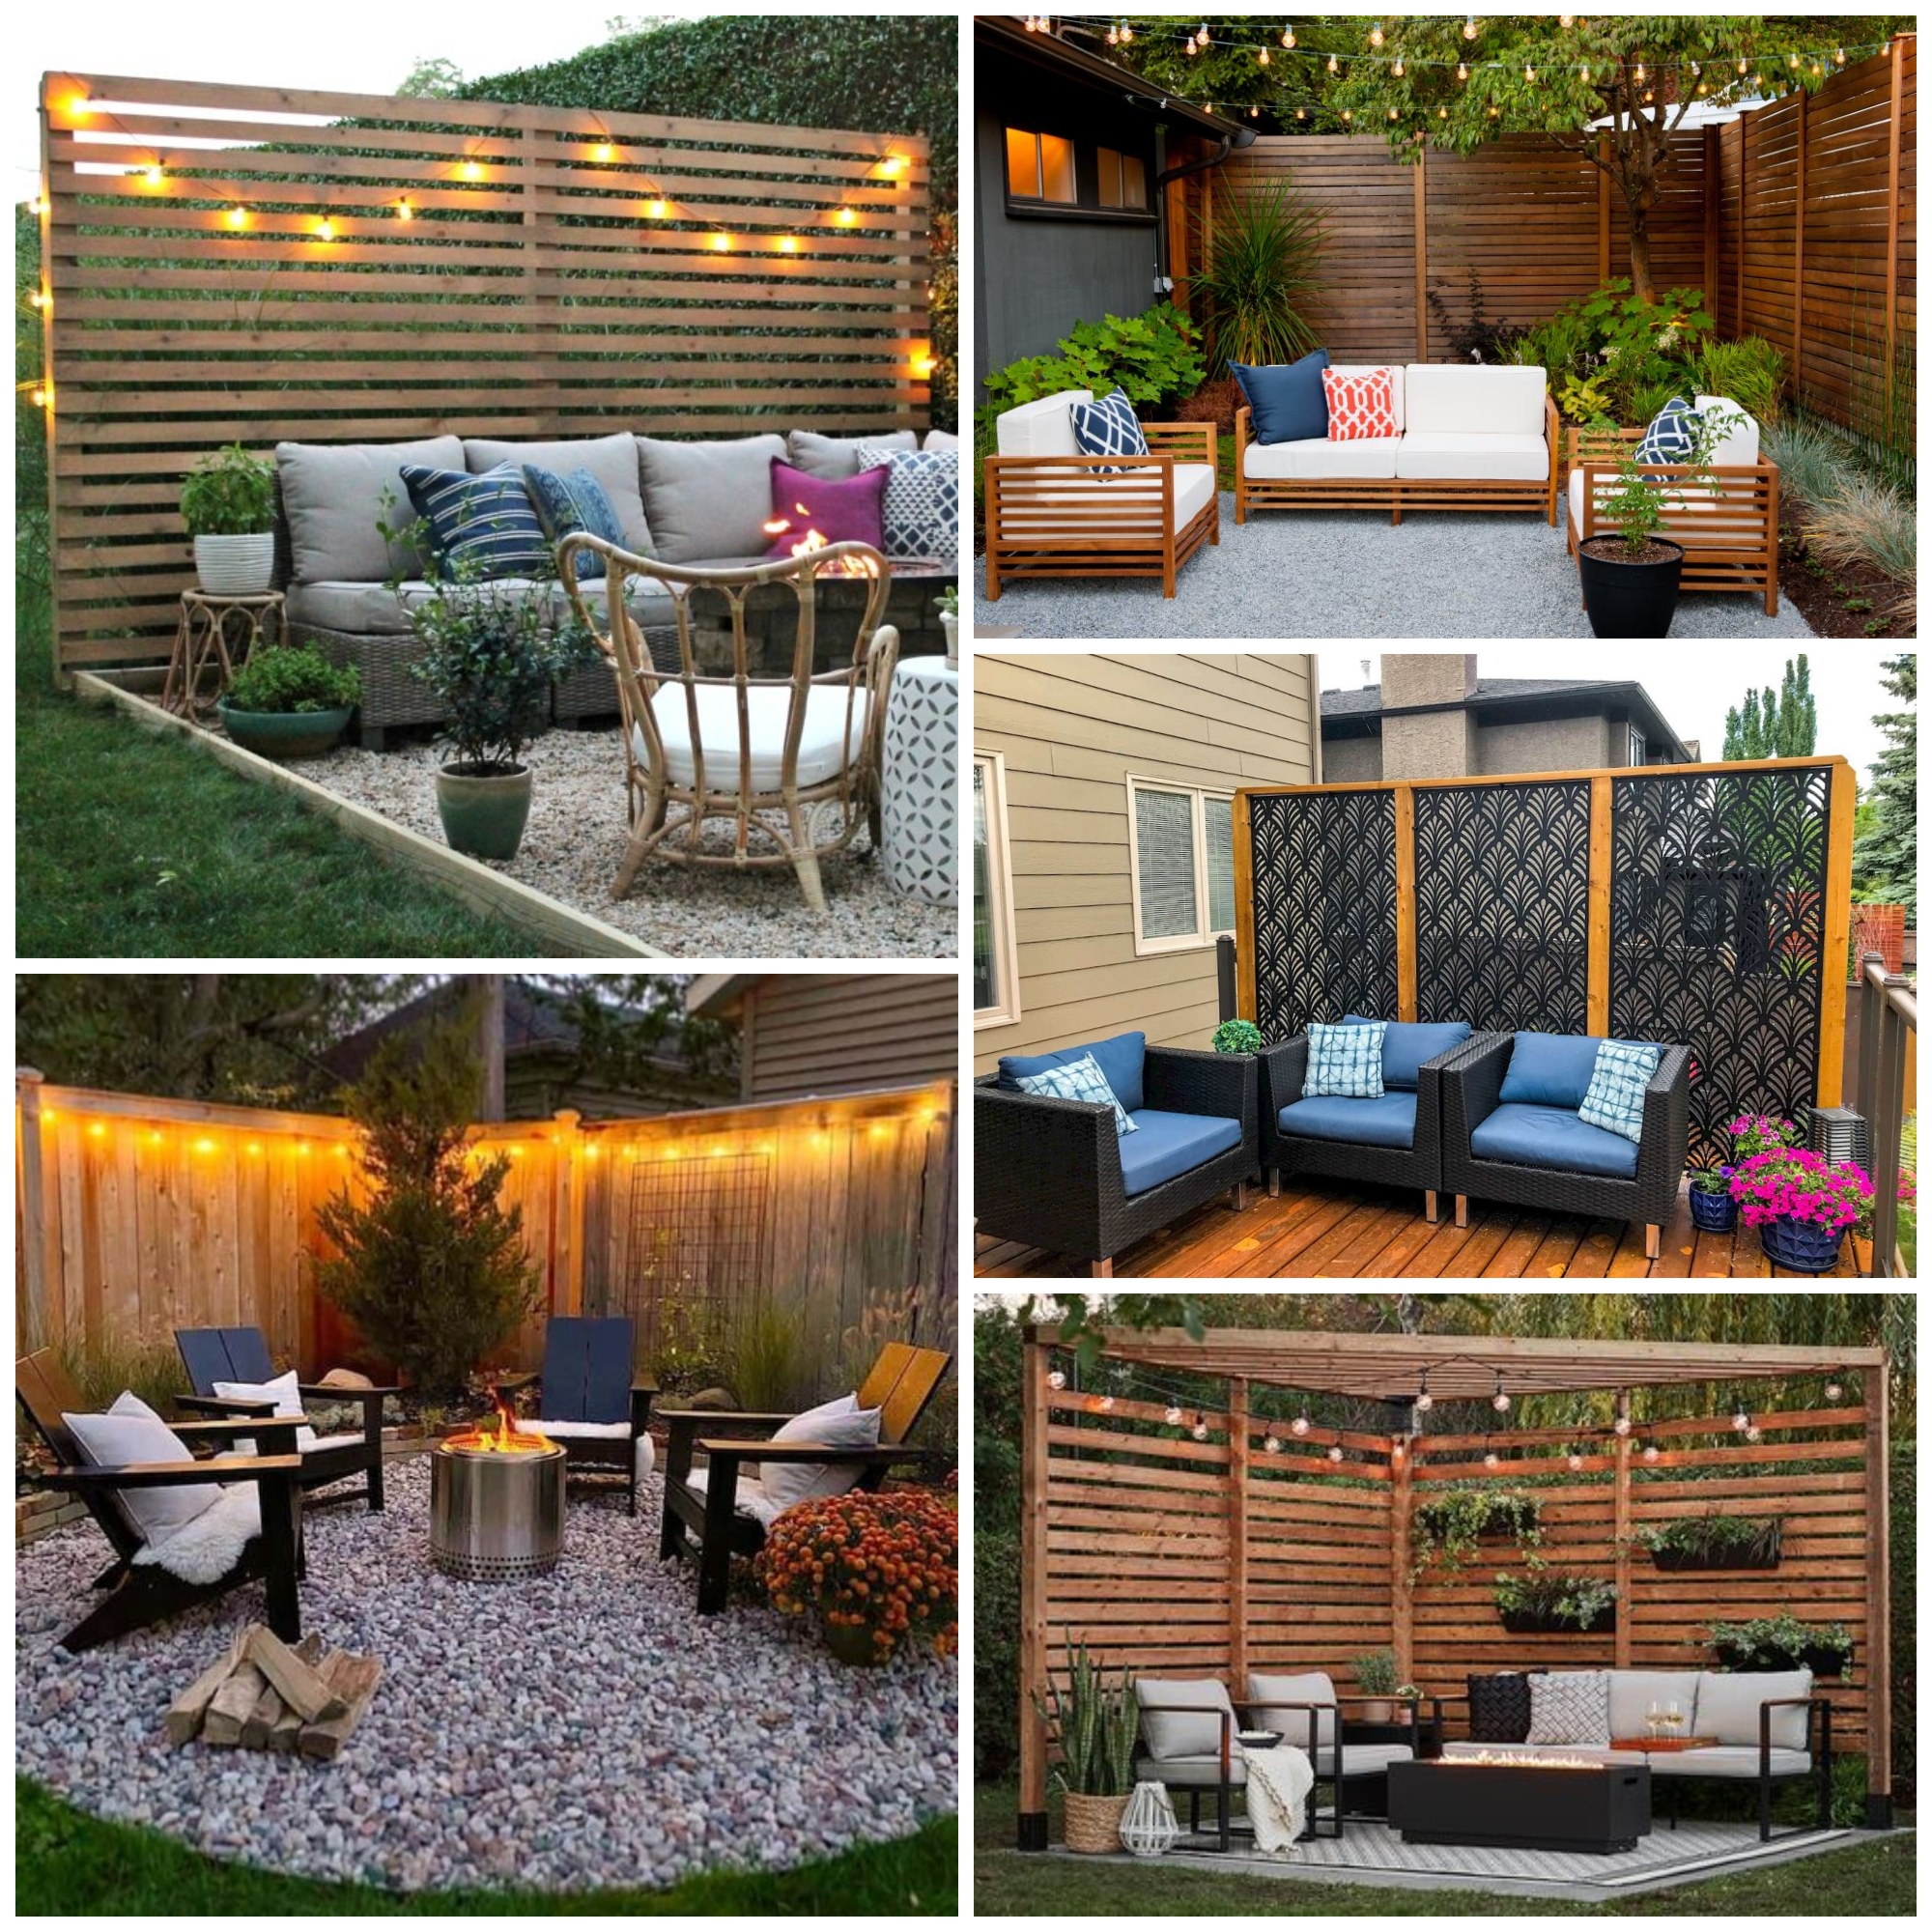 Landscaping for Privacy: Backyard Privacy Ideas